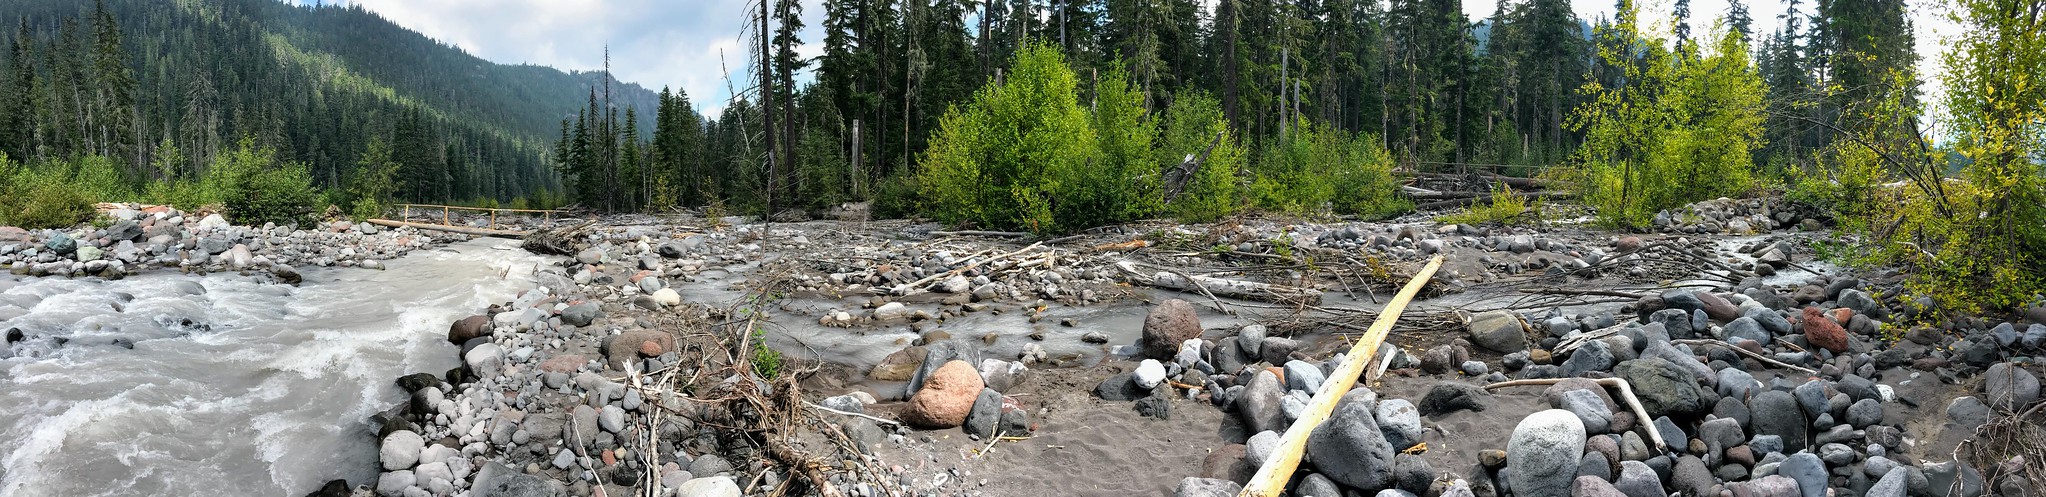 West fork of the White River crossing